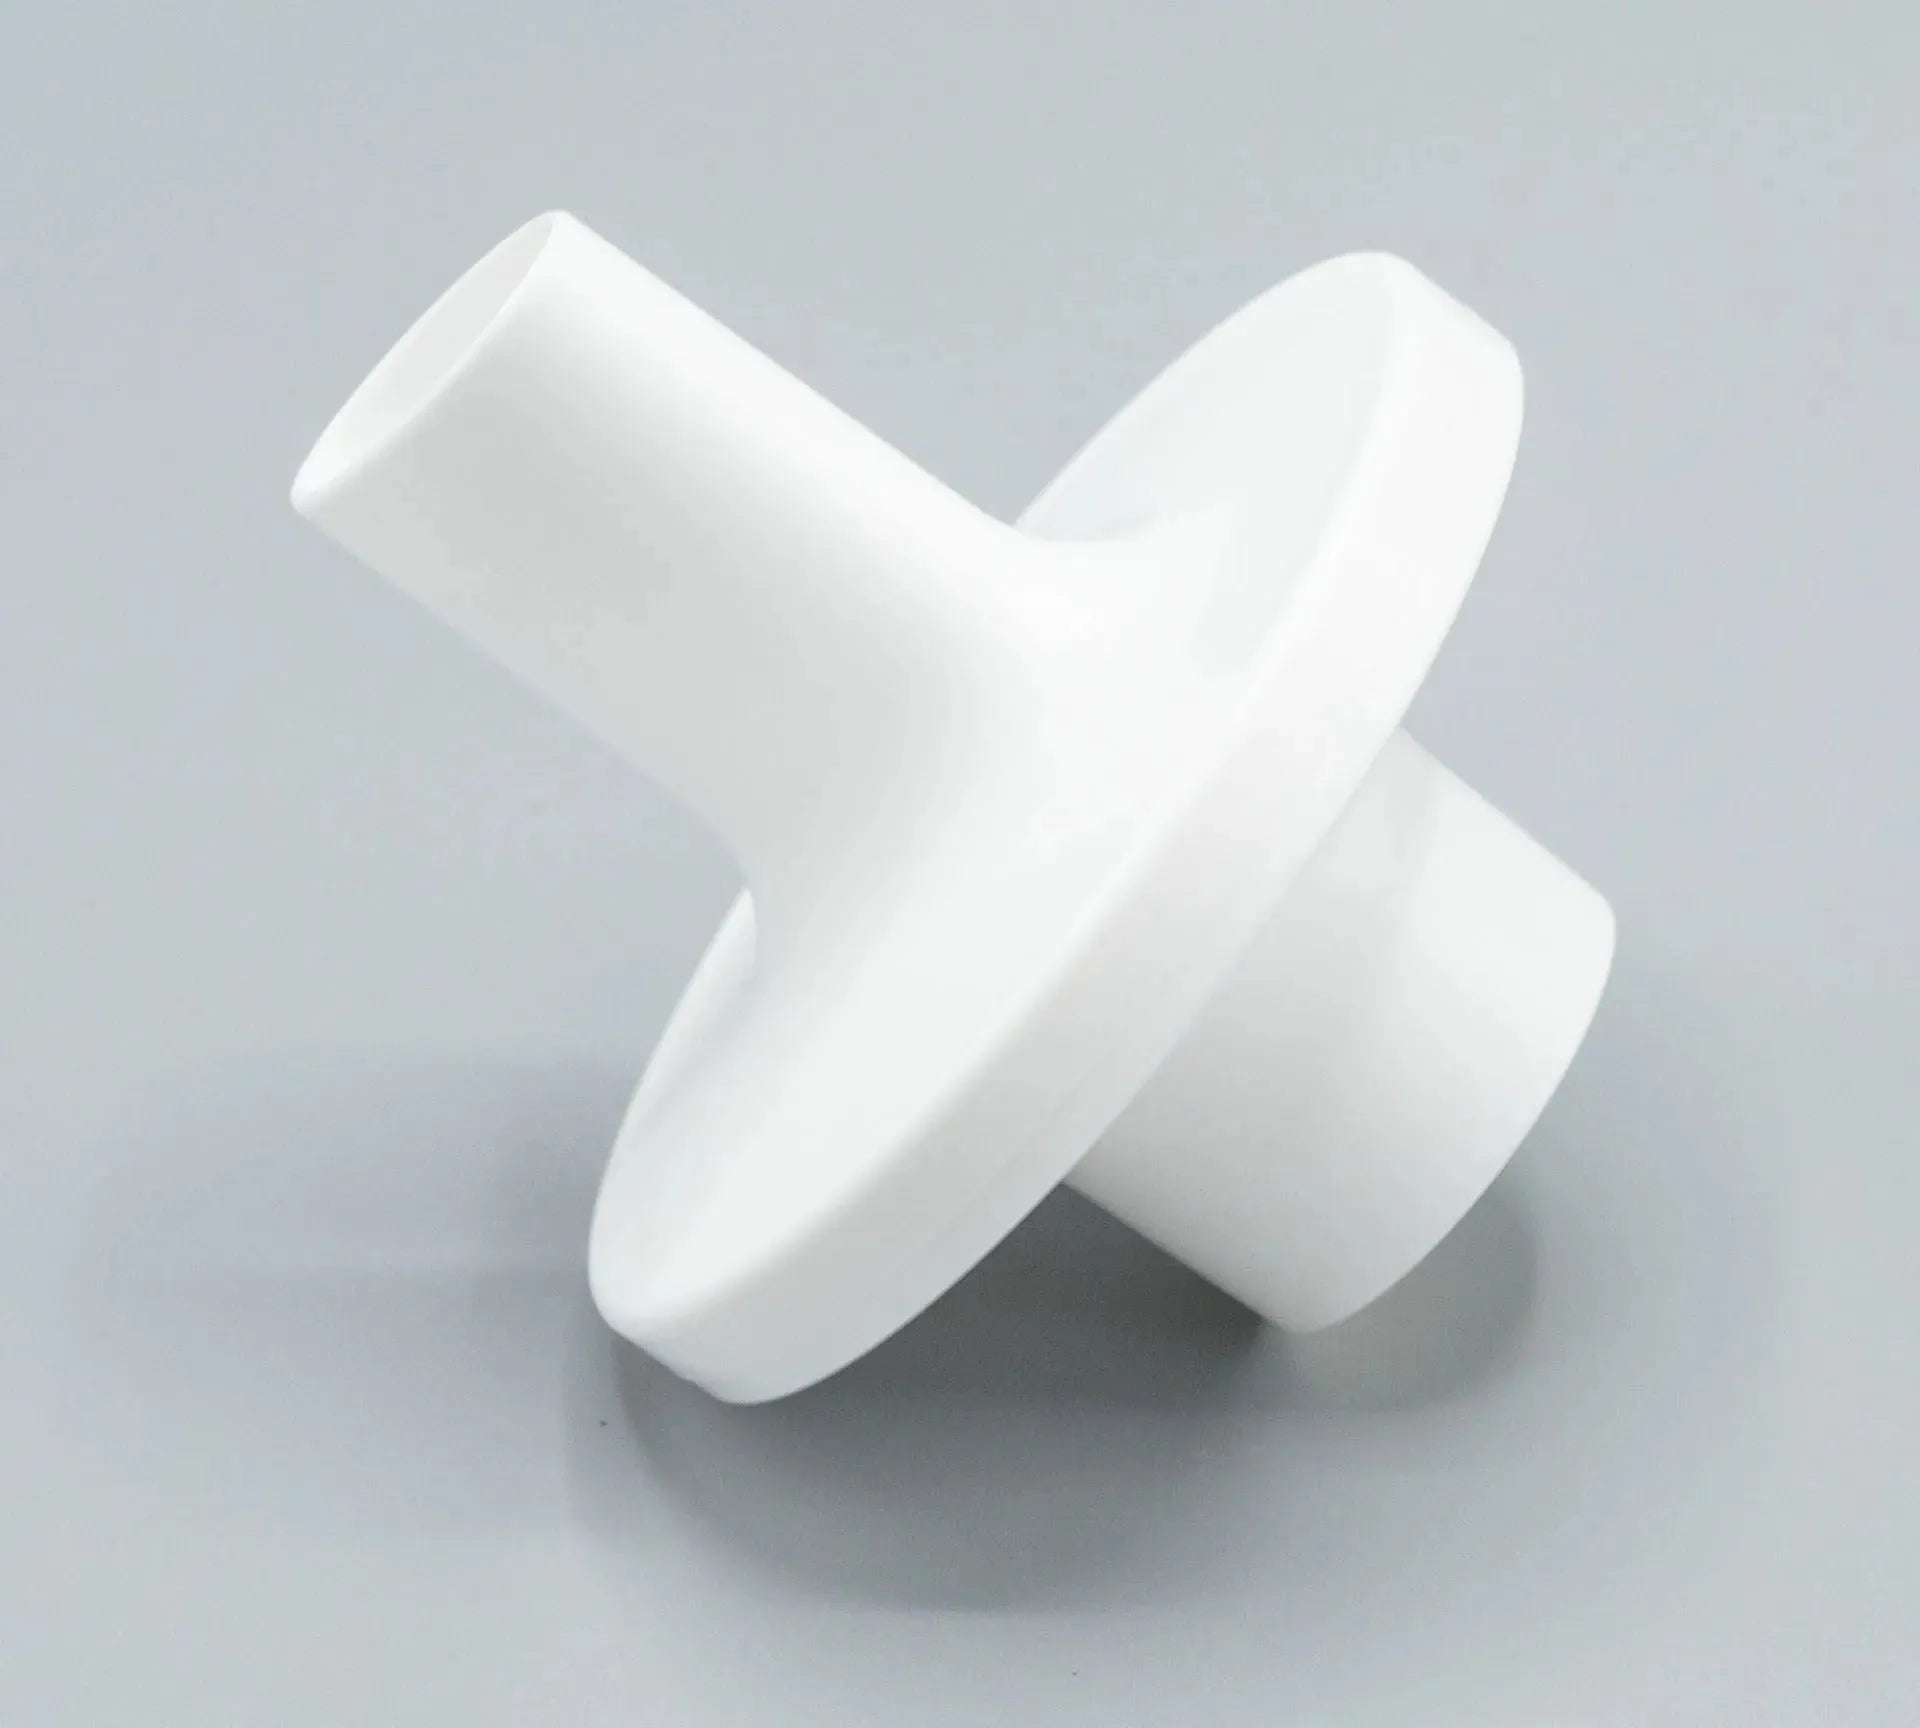 Polytechnic Elliptical bacterial viral filter mouthpiece is elliptical in shape and white in color.